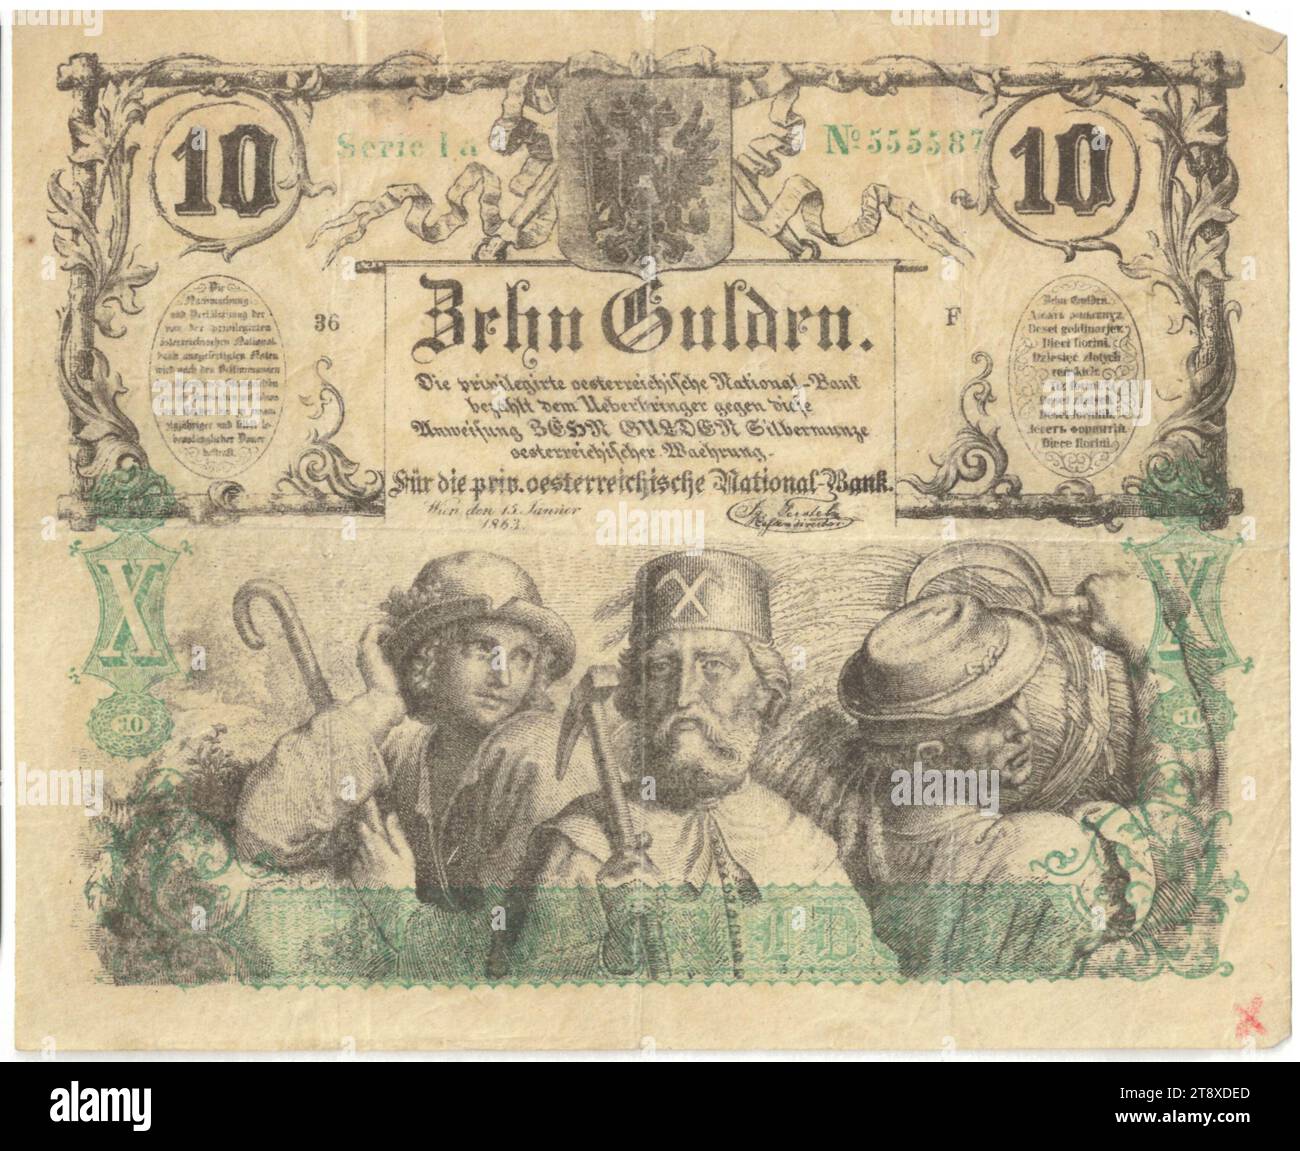 Banknote (counterfeit), 10 Gulden, Privilegierte Österreichische National-Bank, mint authority, Date after 15.01.1863, paper, printing, width 141 mm, height 116 mm, Mint, Vienna, Mint territory, Austria, Empire (1804-1867), Finance, counterfeit, forgery, farmers, working class, laborers, coat of arms (as symbol of the state, etc.), bank-note, money, The Vienna Collection Stock Photo